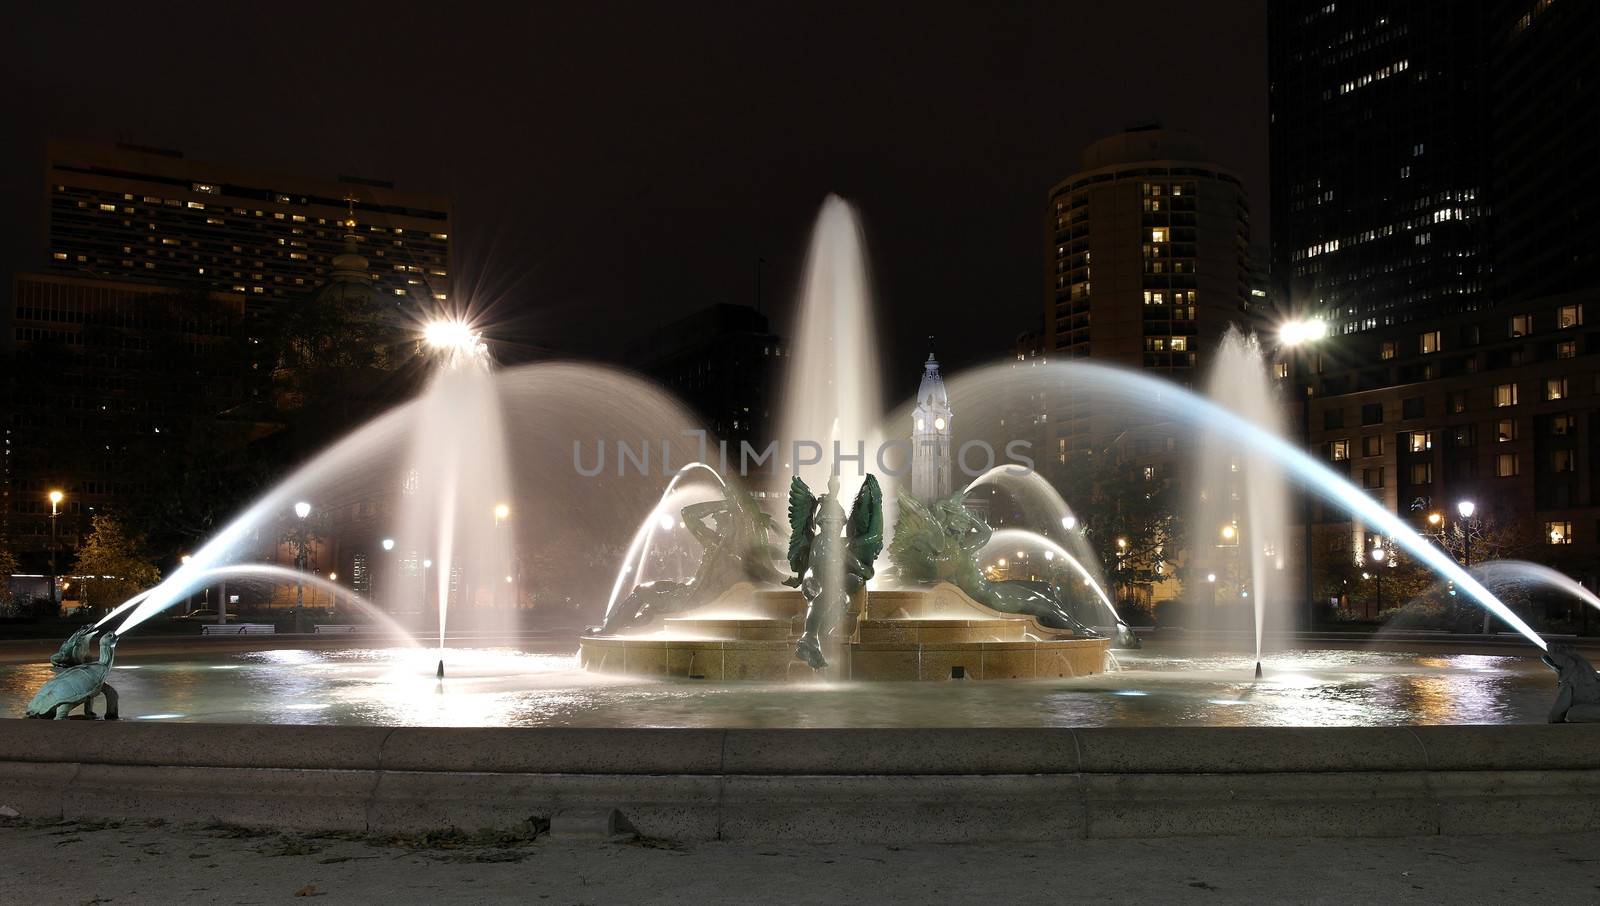 Swann memorial fountain in downtown Philadelphia at night by gary718